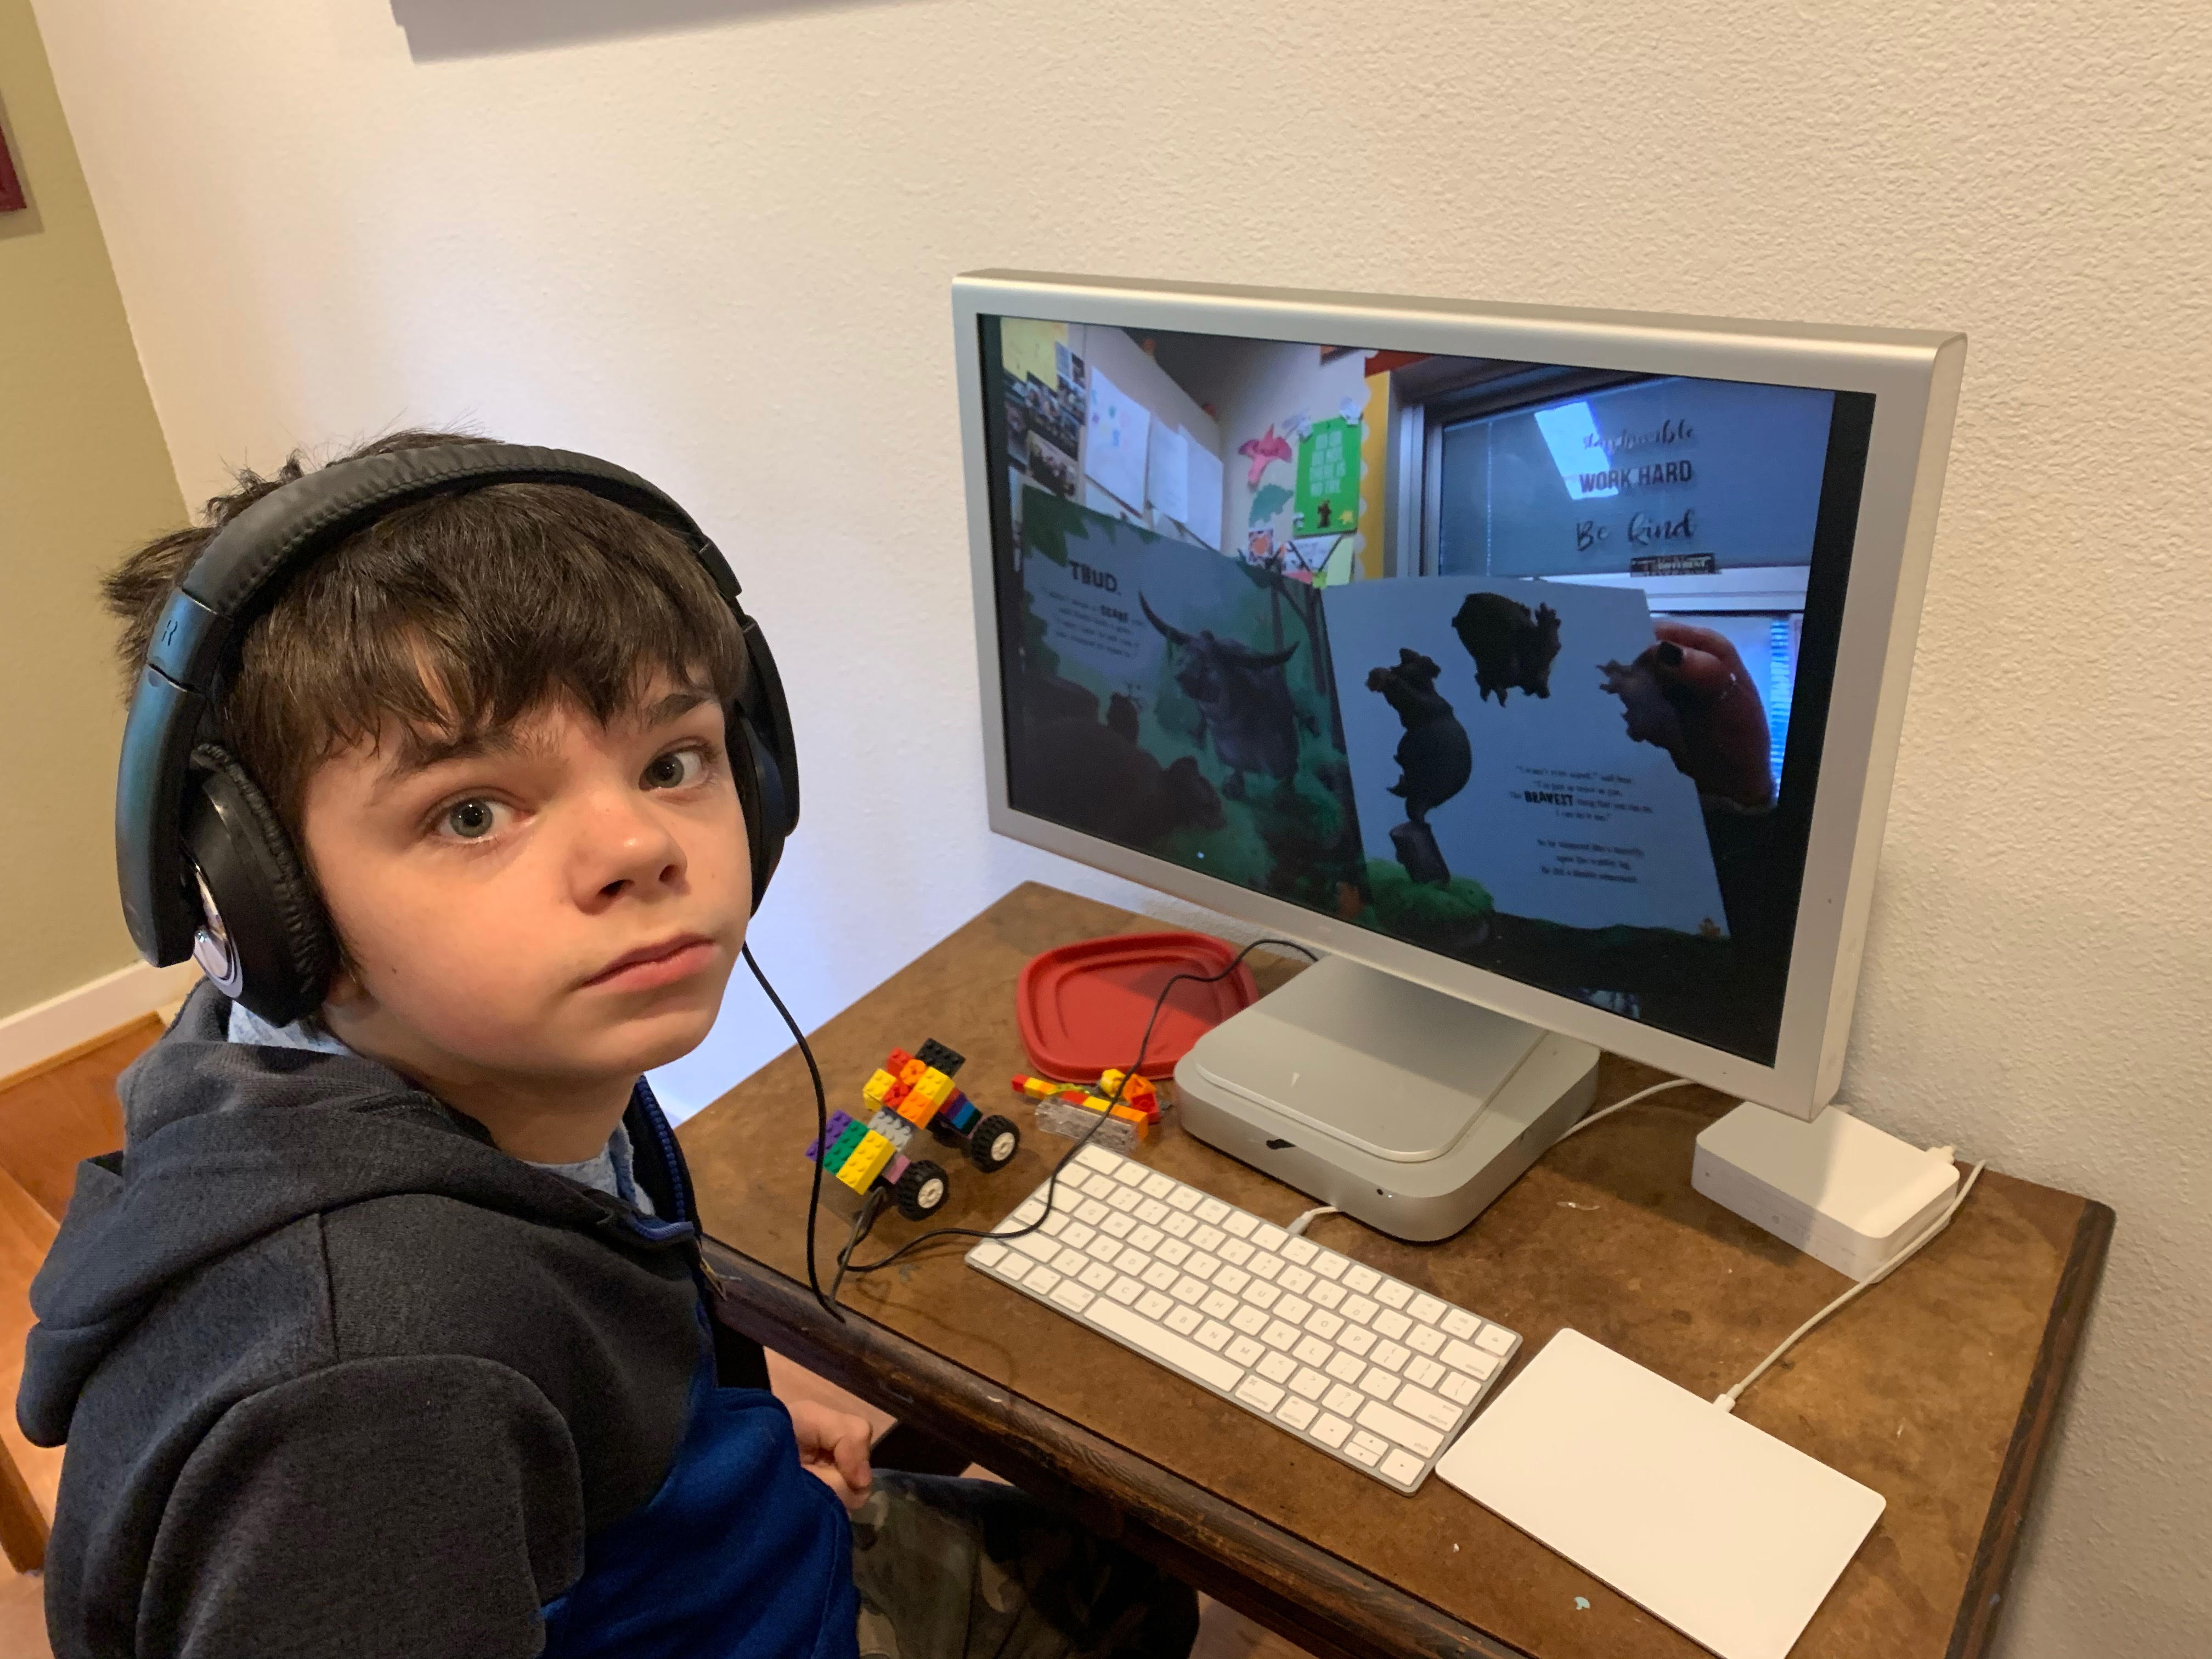 Daniel Sabol, an 8th grader in the Northshore School District in Bothell, Washington, watches his teacher read a book on YouTube after the school district closed classes on March 9, 2020 and transitioned temporarily to online learning. (Courtesy Amy Amirault)